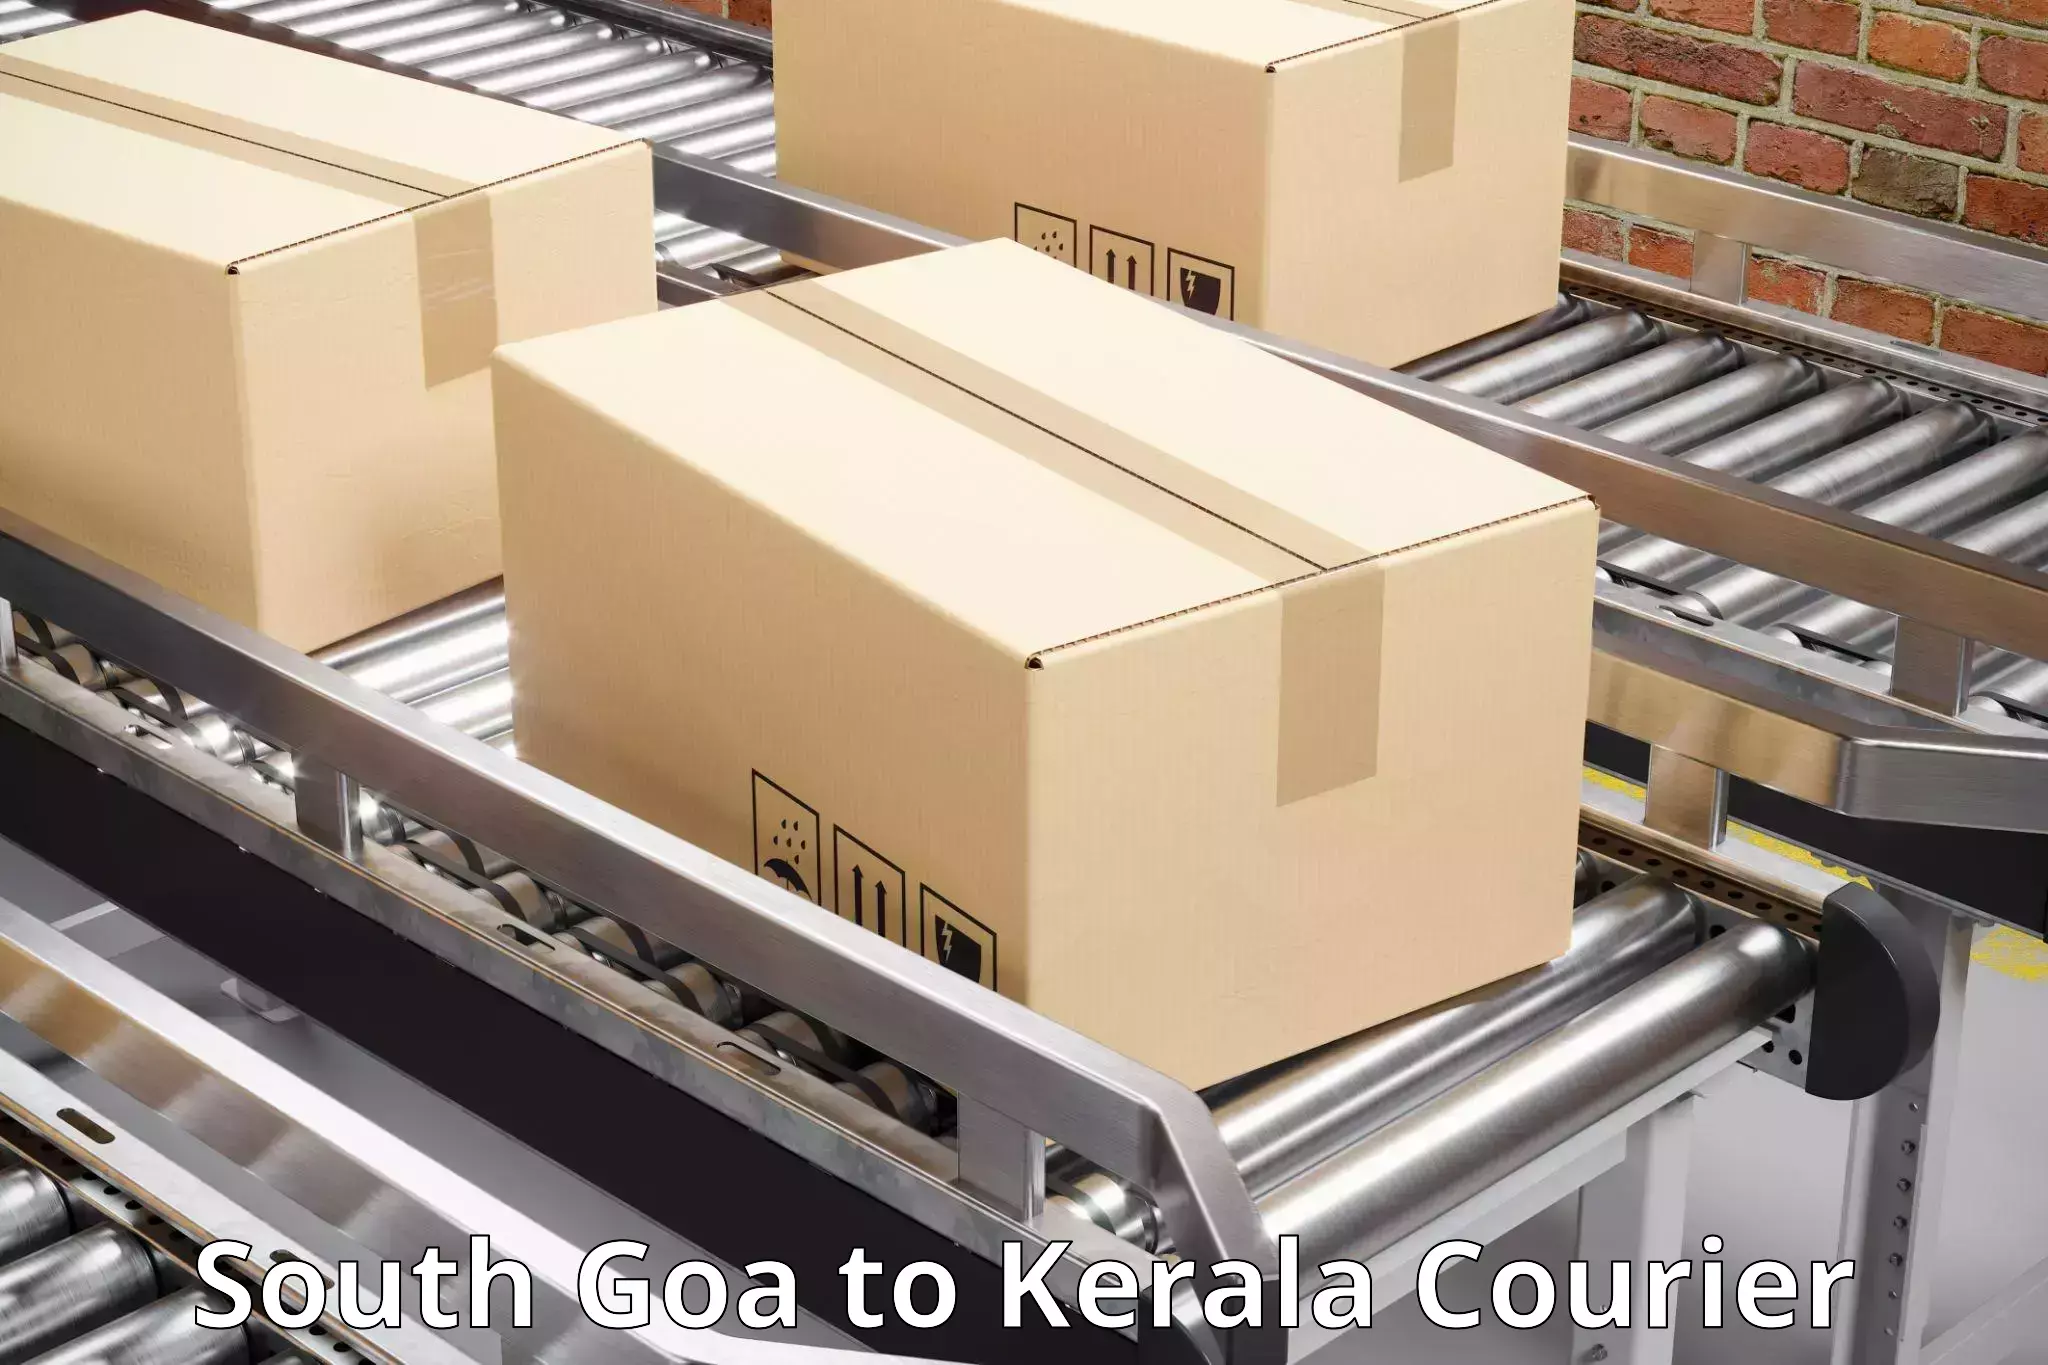 Fast delivery service South Goa to Munnar